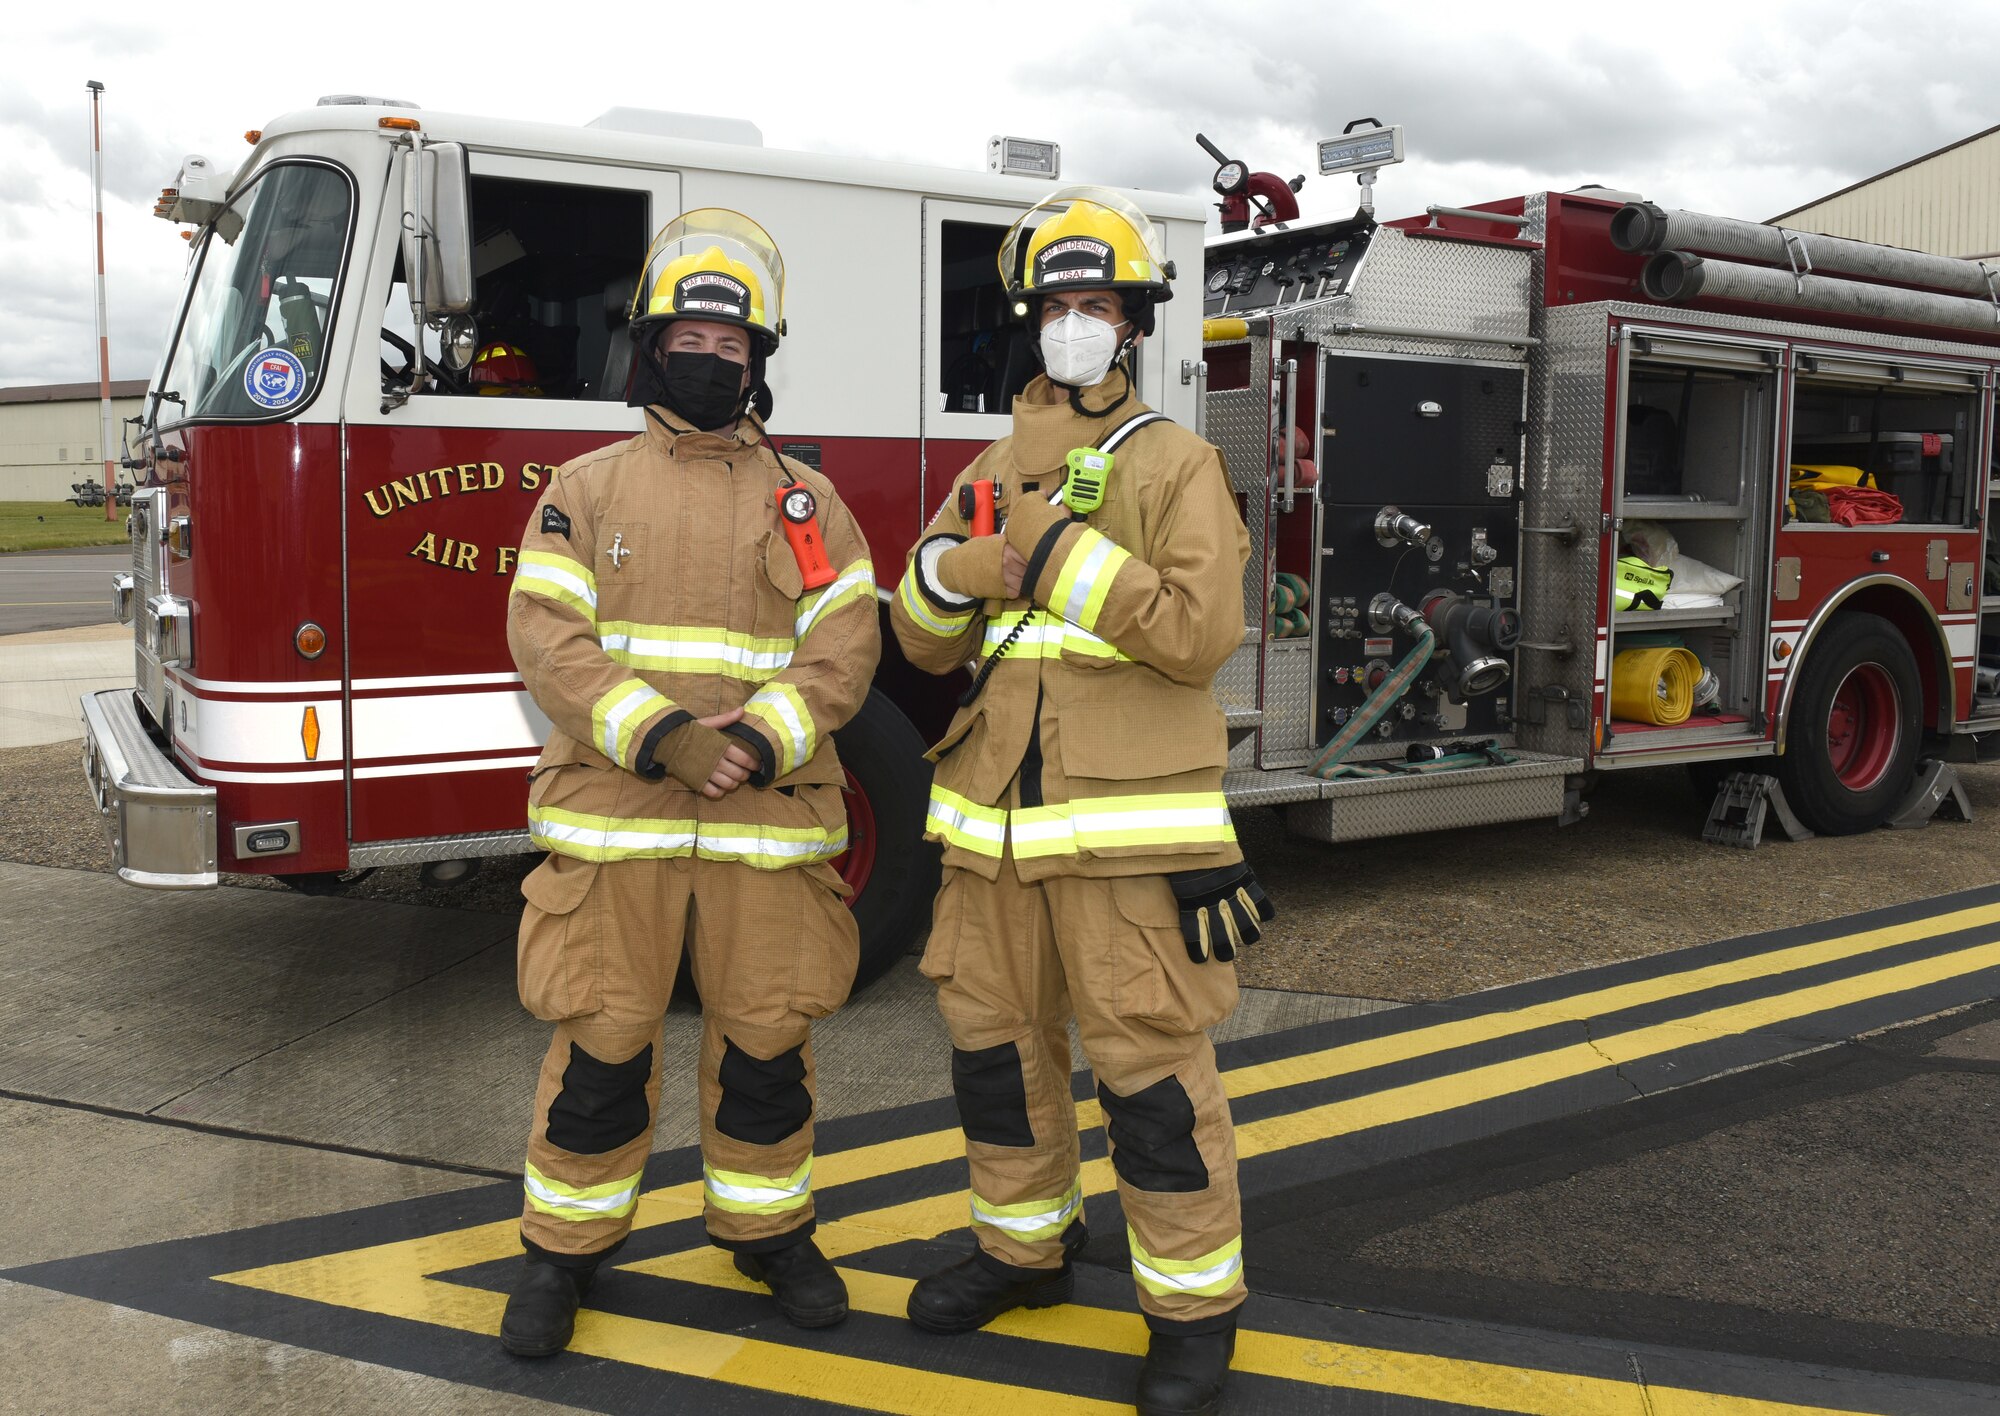 U.S. Air Force Airman 1st Class Adam Luke, left, and Airman Robert Cataldo, both 100th Civil Engineer Squadron firefighters, pose for a photo by a fire truck at the Diversity and Inclusion Day event at Royal Air Force Mildenhall, England, Aug. 13, 2021. The event included a variety of performances, food and informational booths, a fire truck, Humvee and various static aircraft. (U.S. Air Force photo by Karen Abeyasekere)